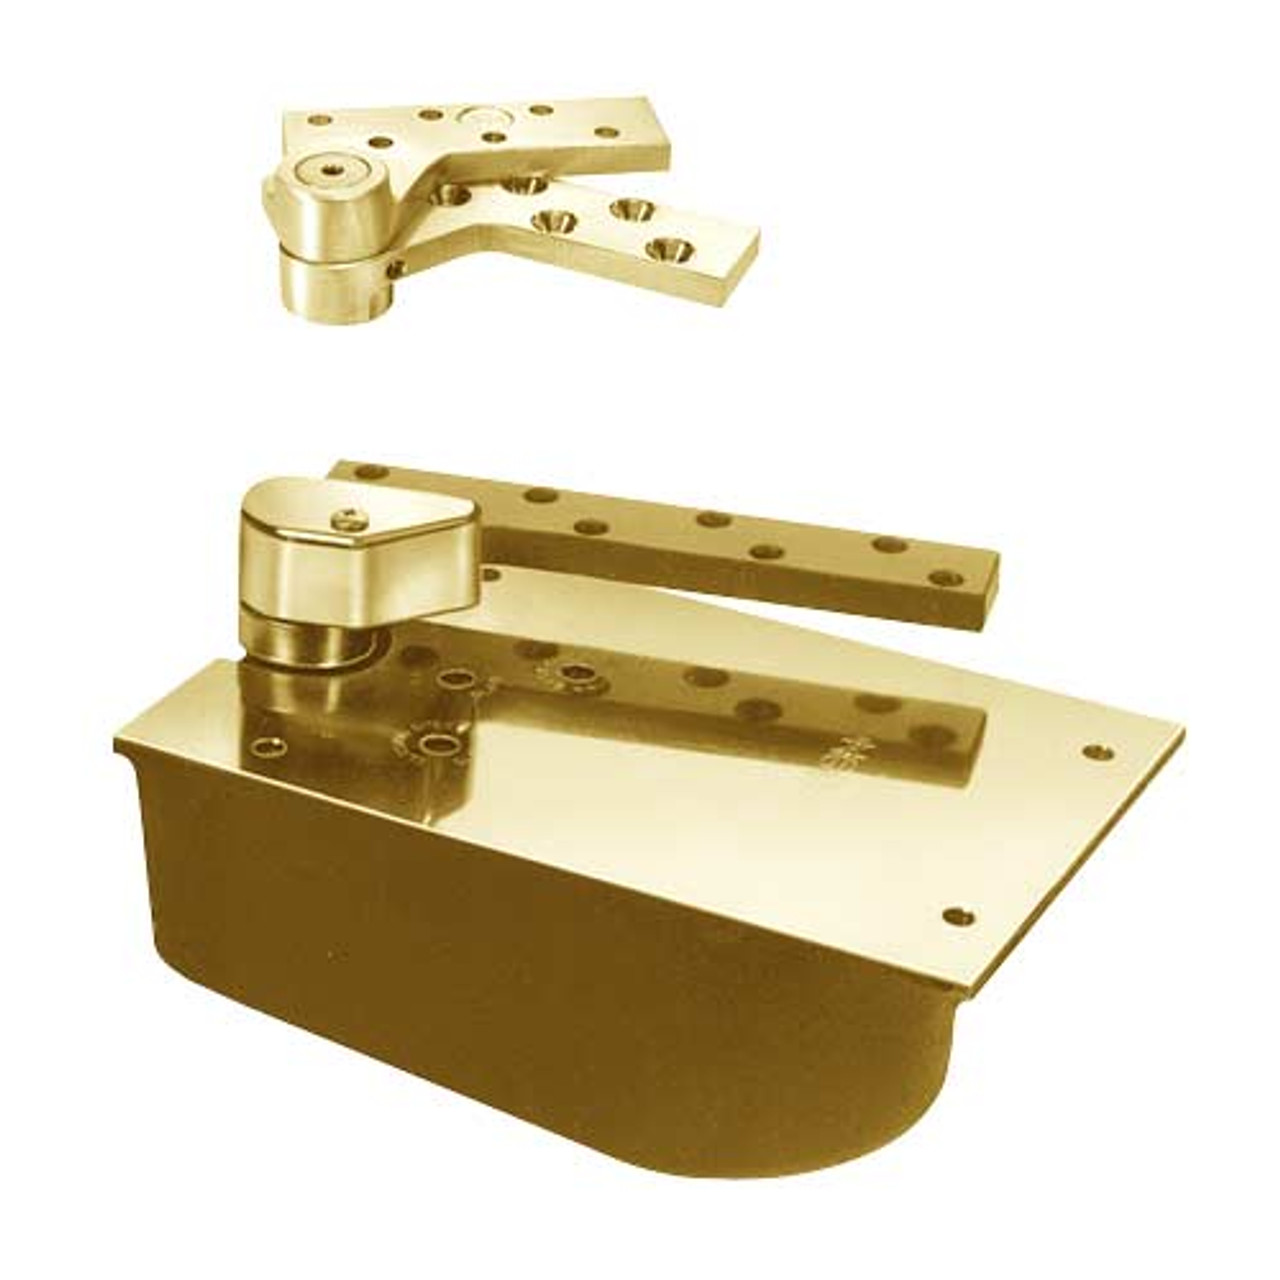 L27-95N-CWF-LH-605 Rixson 27 Series Extra Heavy Duty Lead Lined Offset Floor Closer in Bright Brass Finish